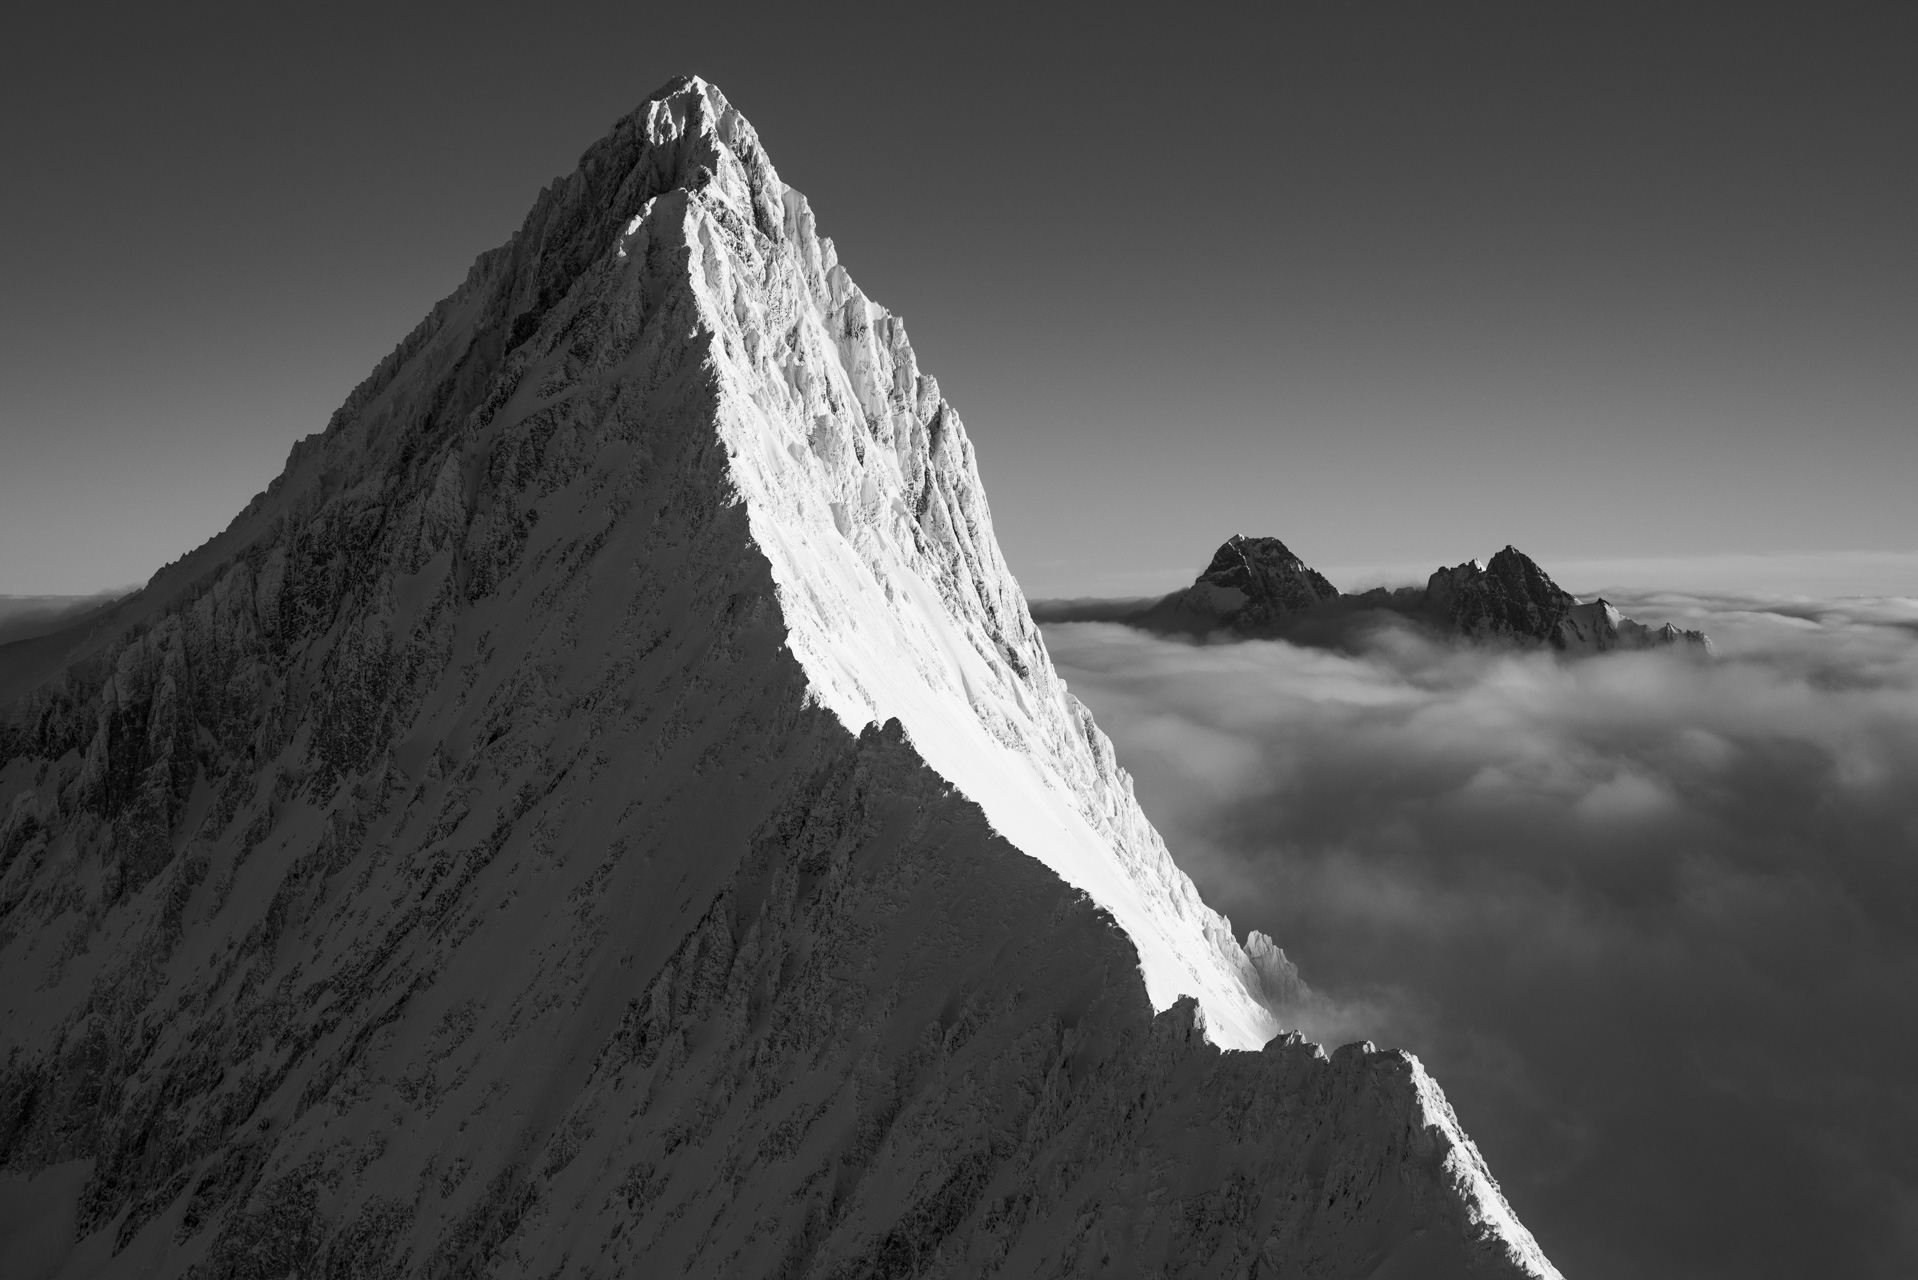 photo finsteraarhorn bernese alps - sea of clouds - snowy mountain black and white - swiss high mountain landscape